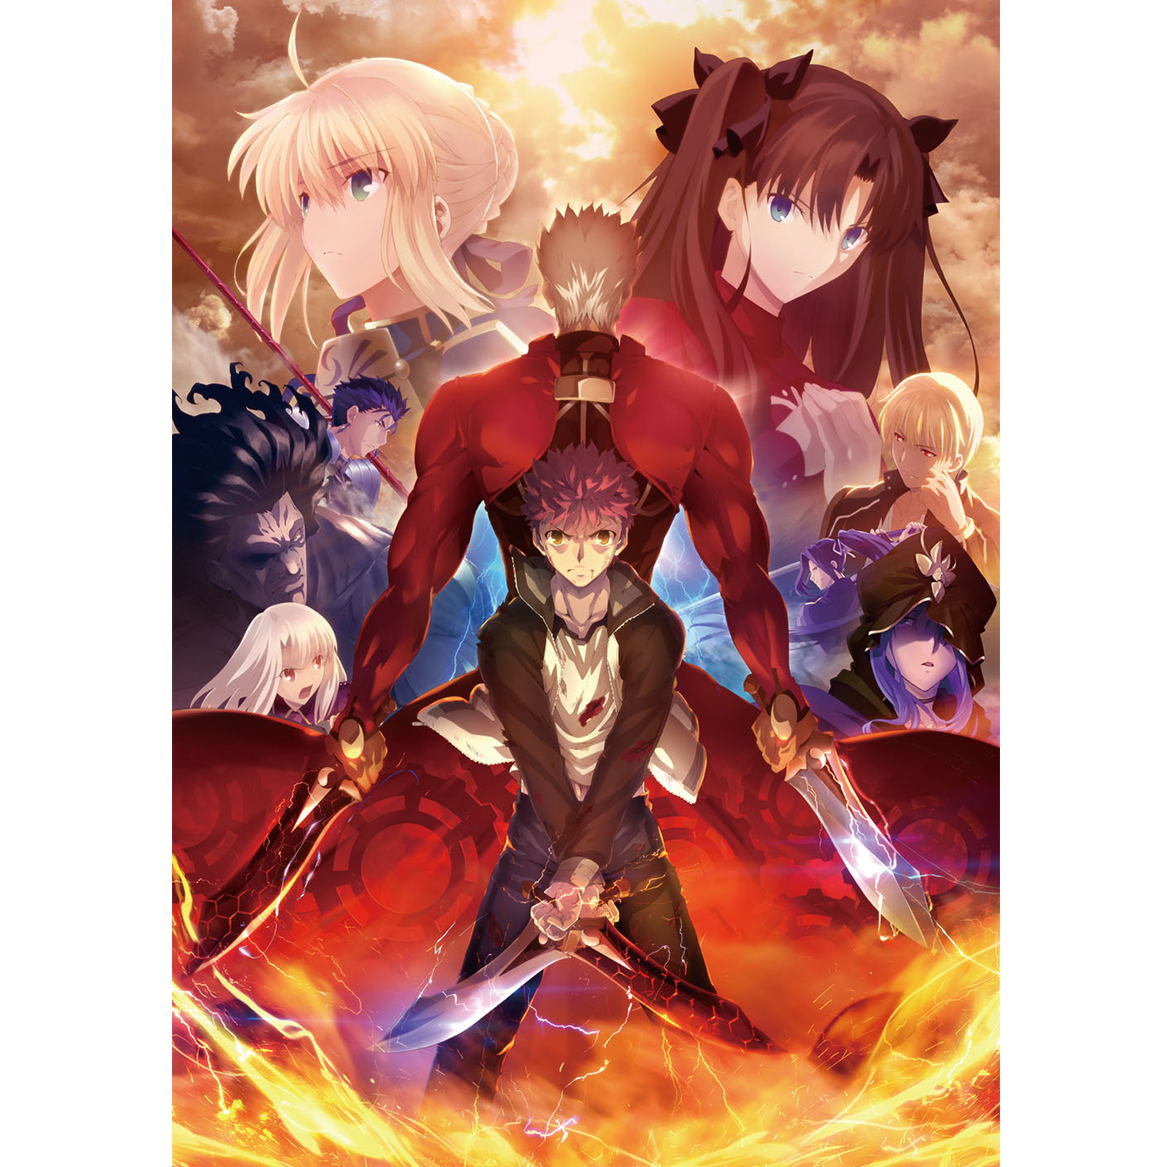 Fate/stay night Unlimited Blade Works - yanbunh.com